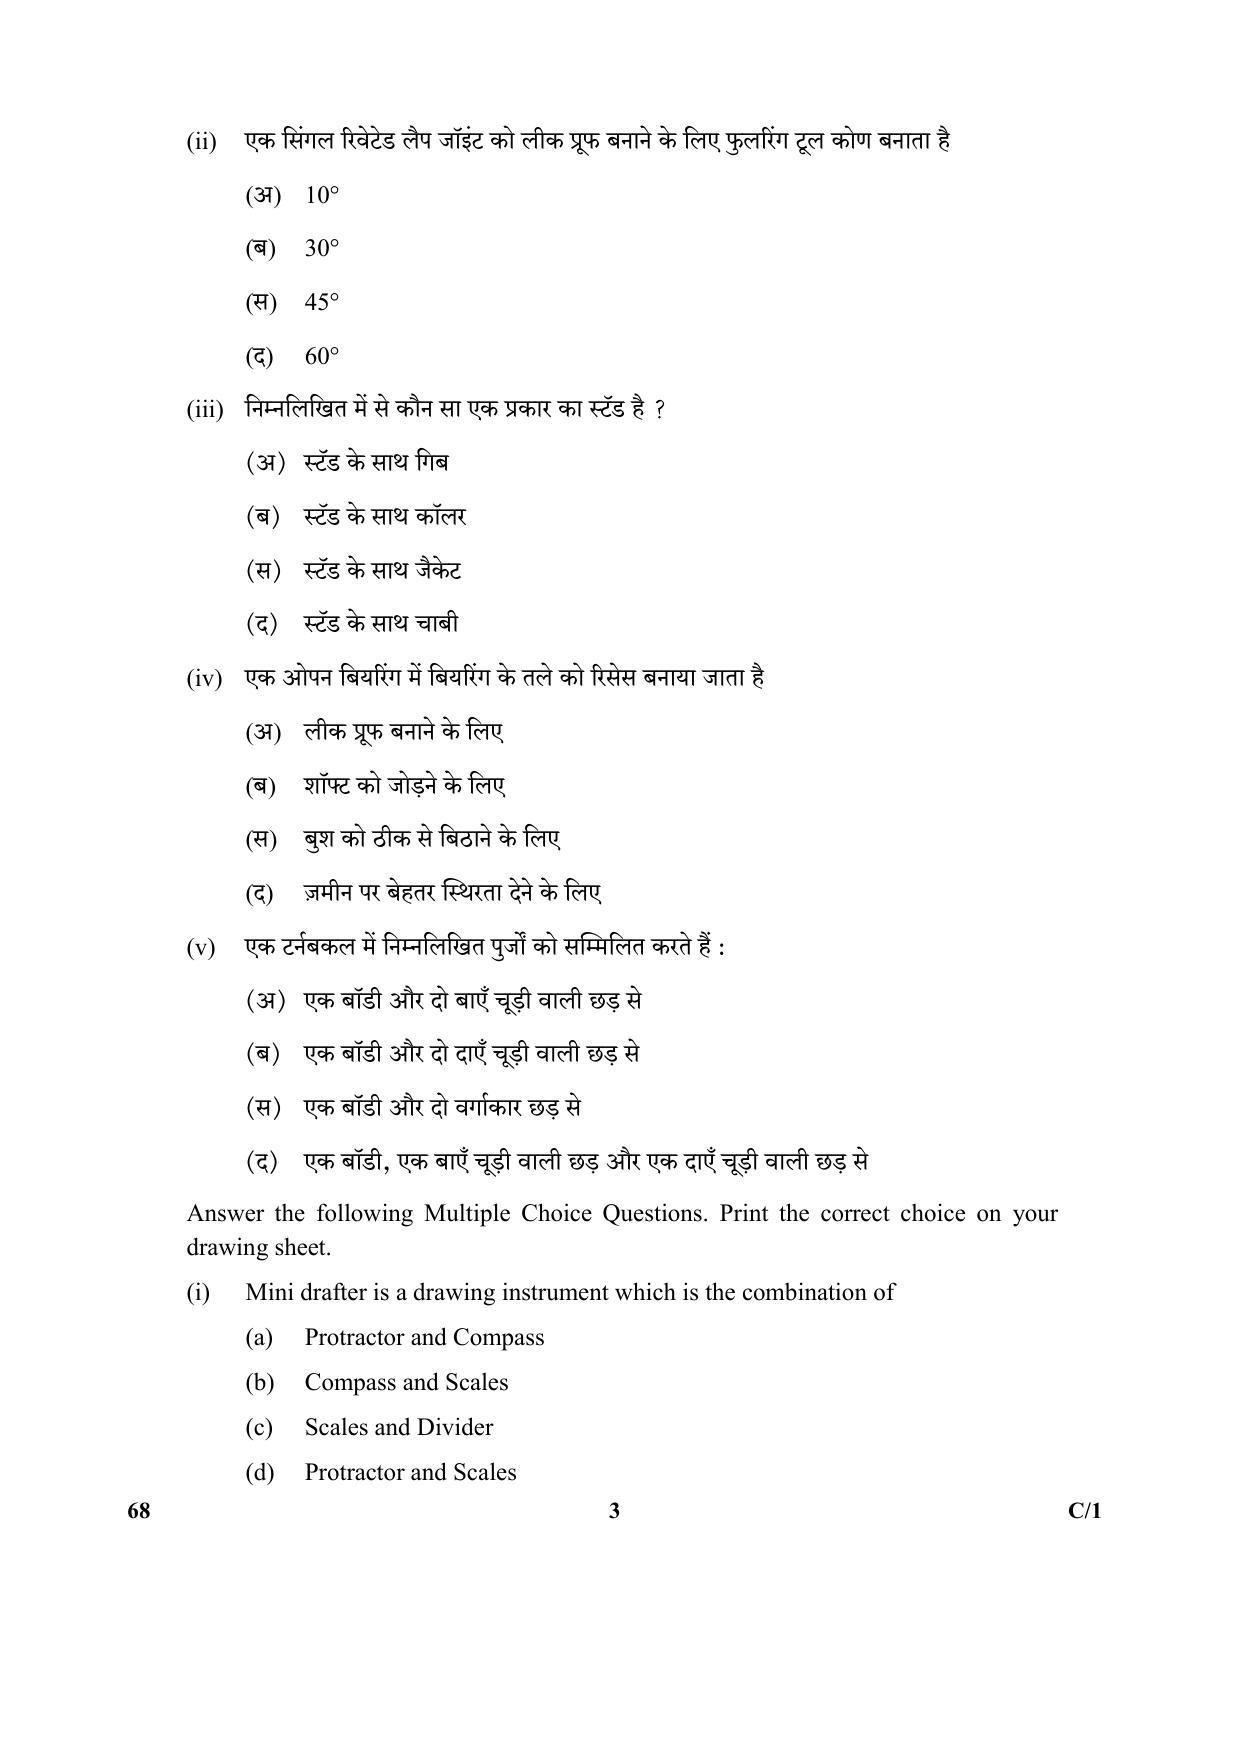 CBSE Class 12 68 (Engineering Graphics) 2018 Compartment Question Paper - Page 3